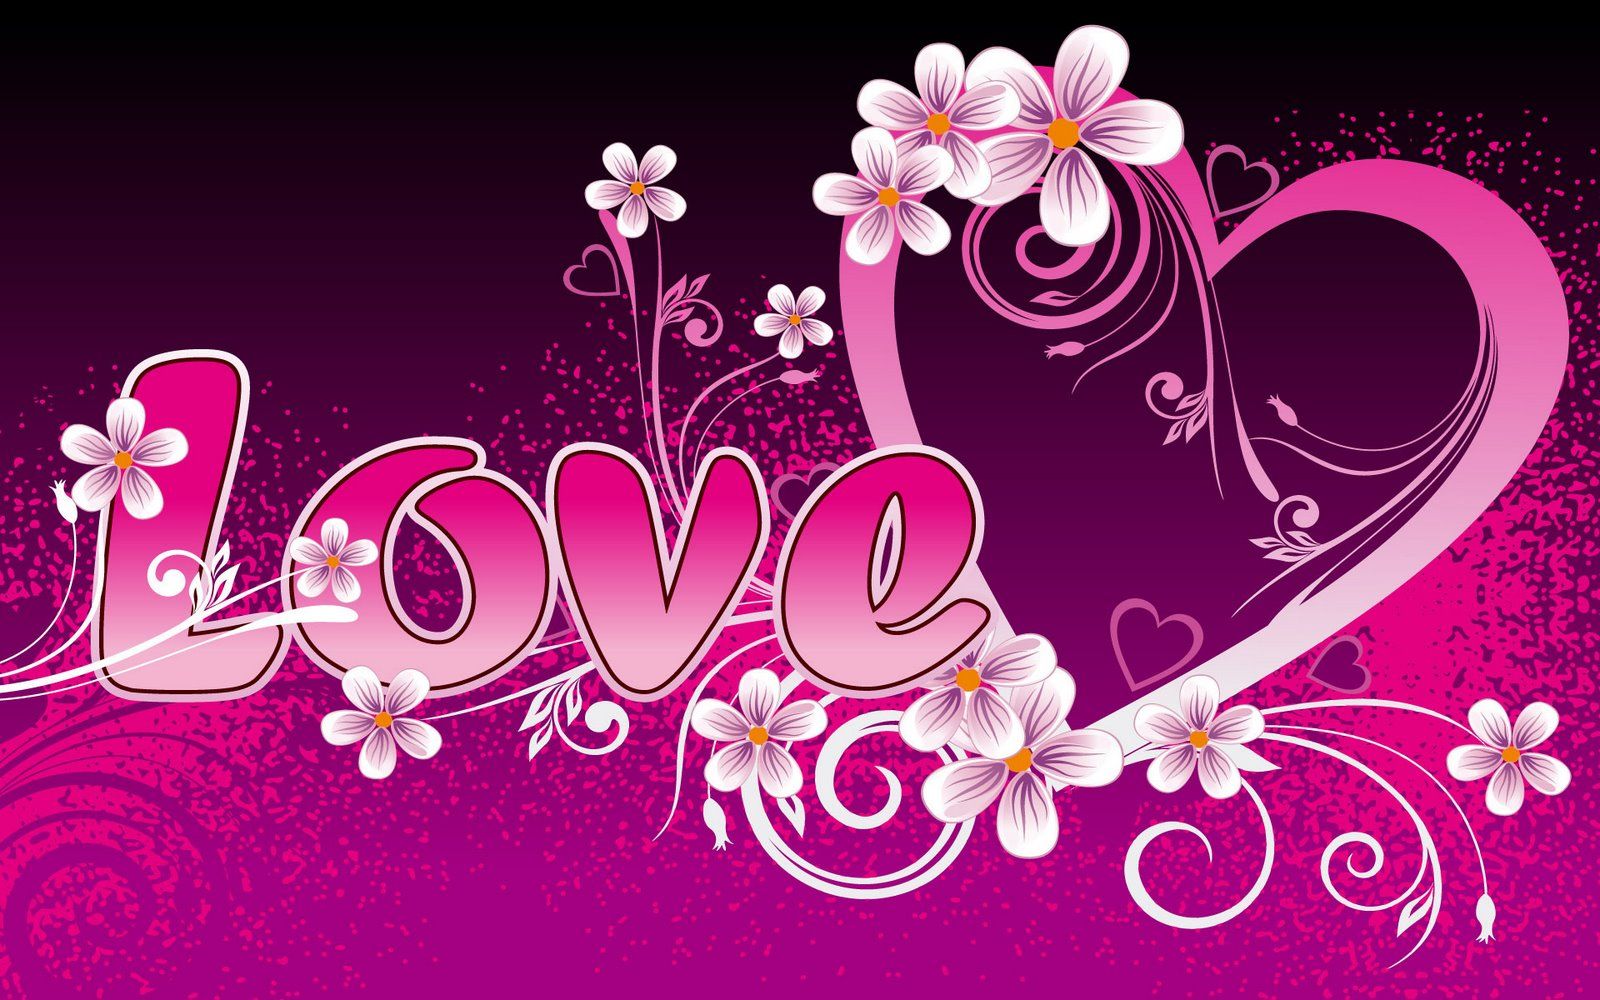 Love wallpapers - , New Wallpapers, New Backgrounds